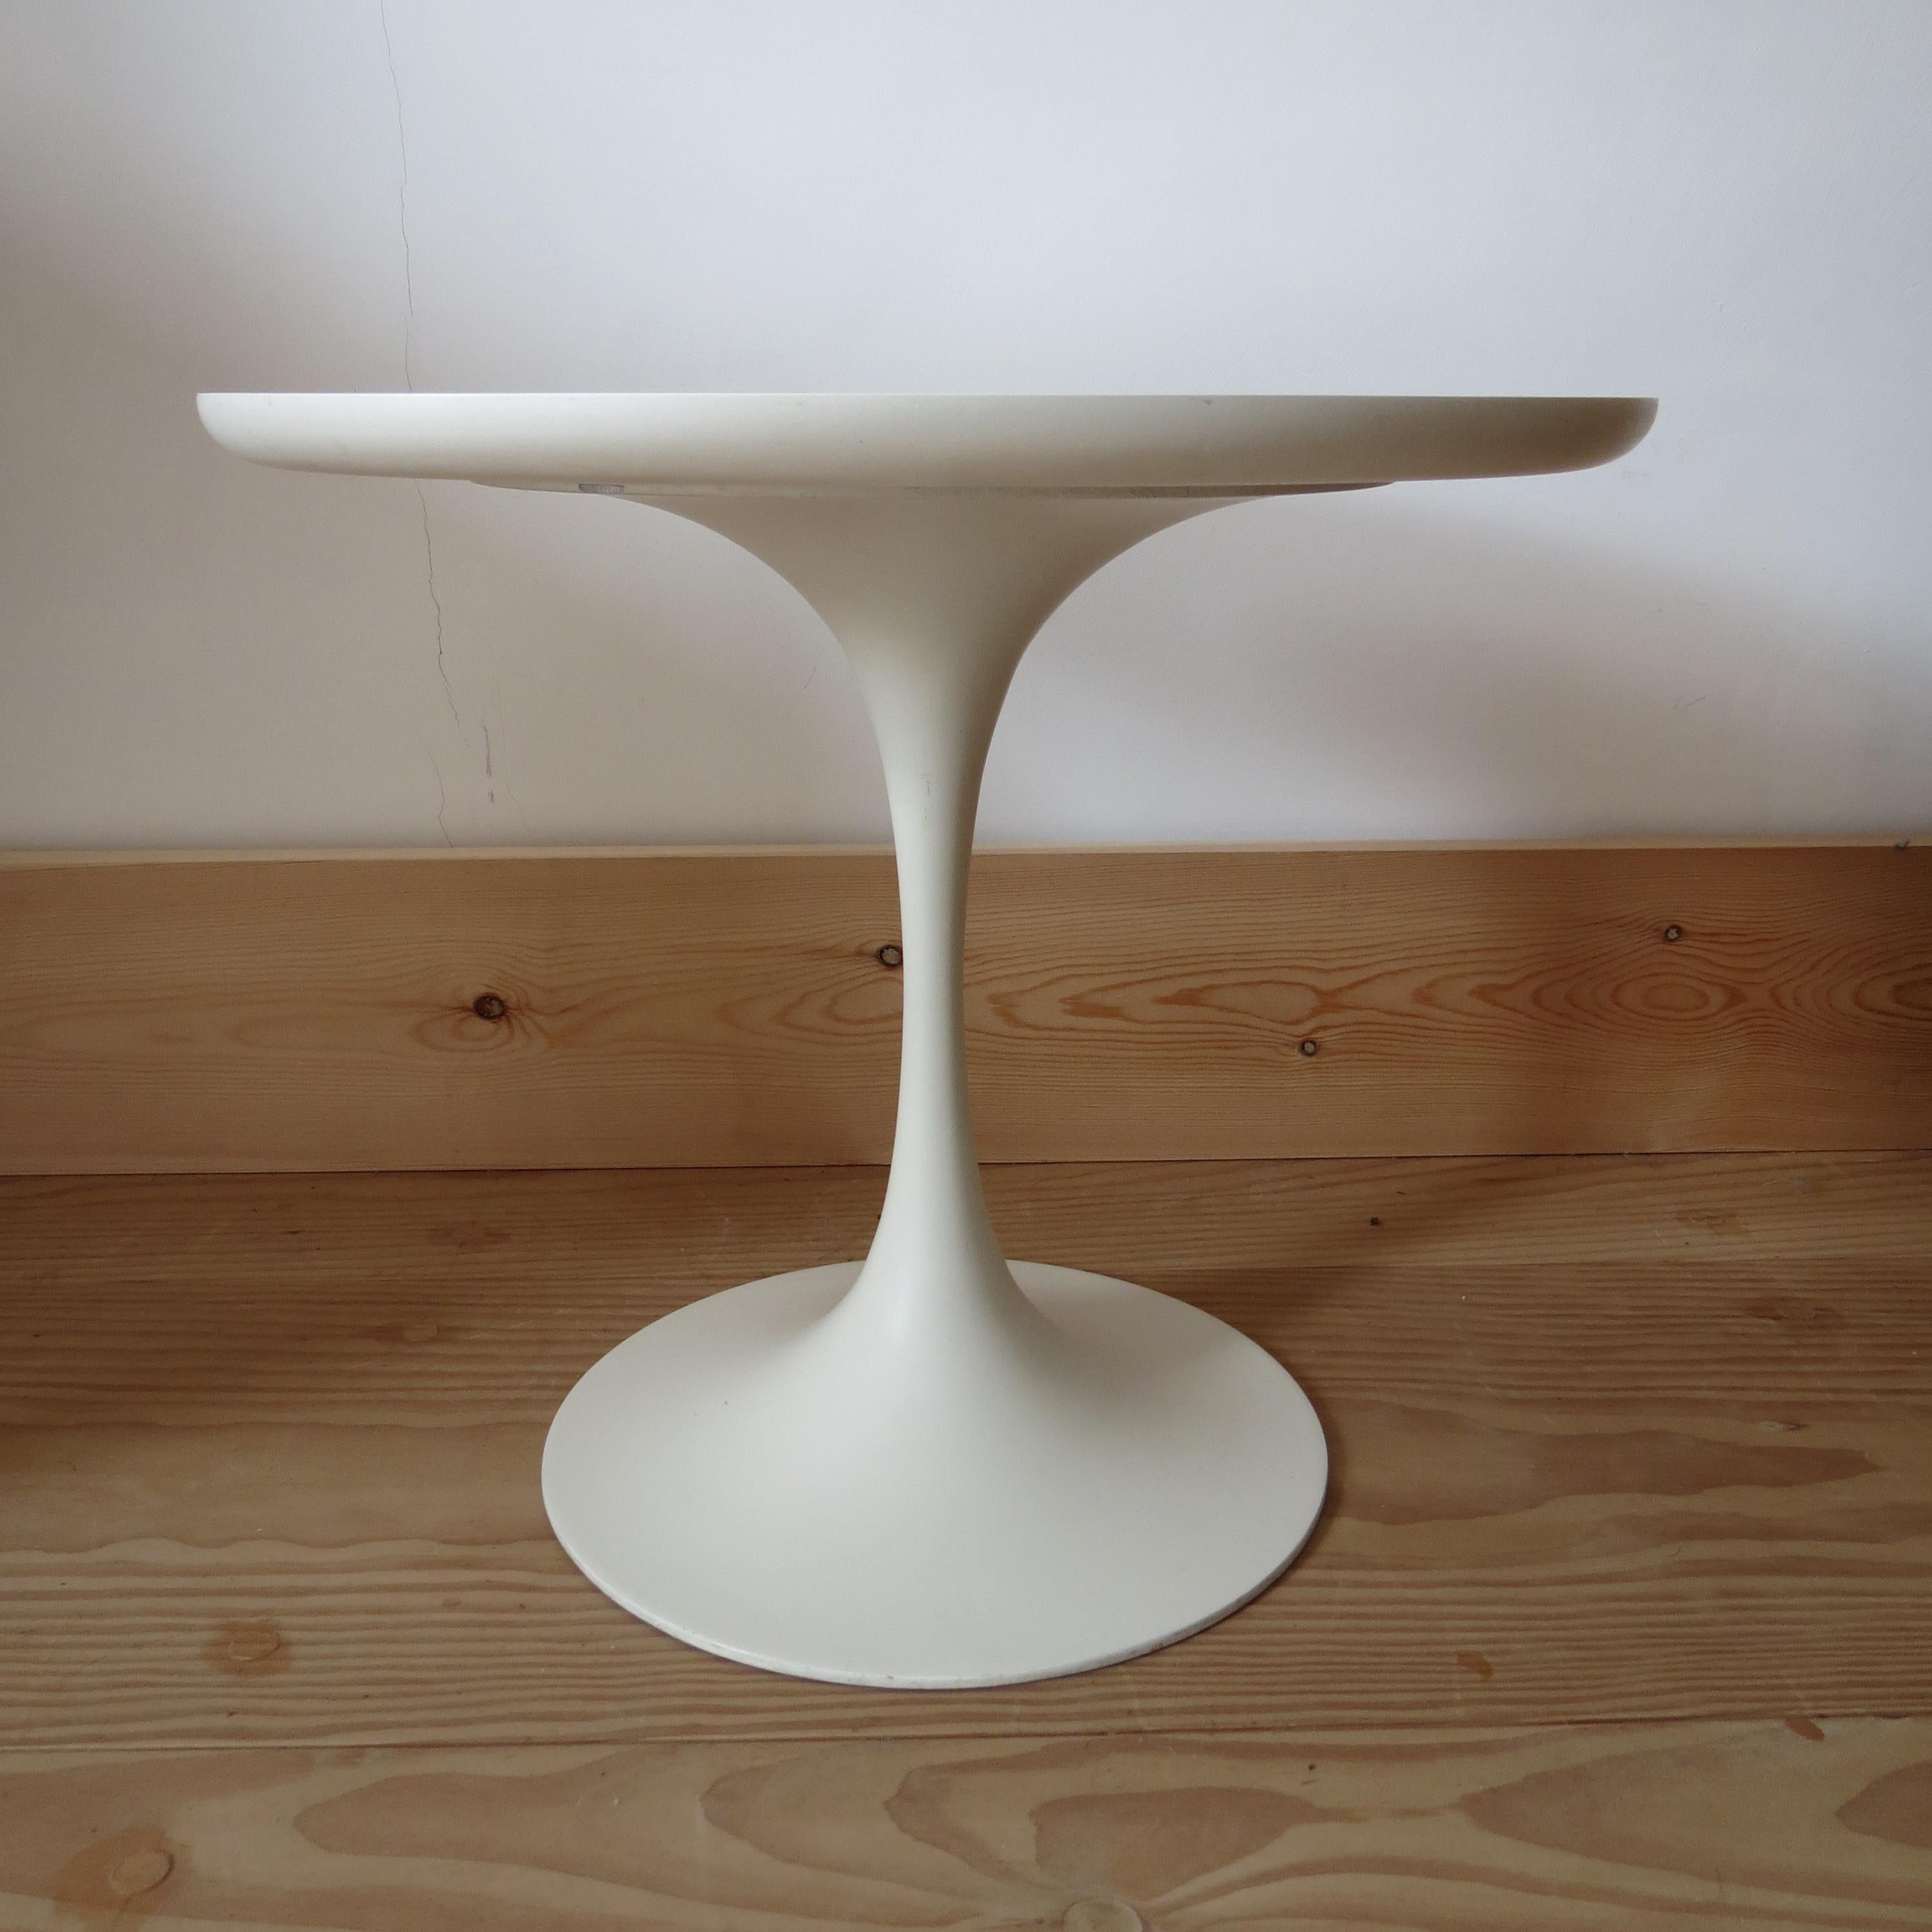 1960s white Tulip side table designed by Maurice Burke for Arkana, Bath, UK.

Cast aluminium base and circular laminate top.

In good condition, minimal signs of wear


ST1002.